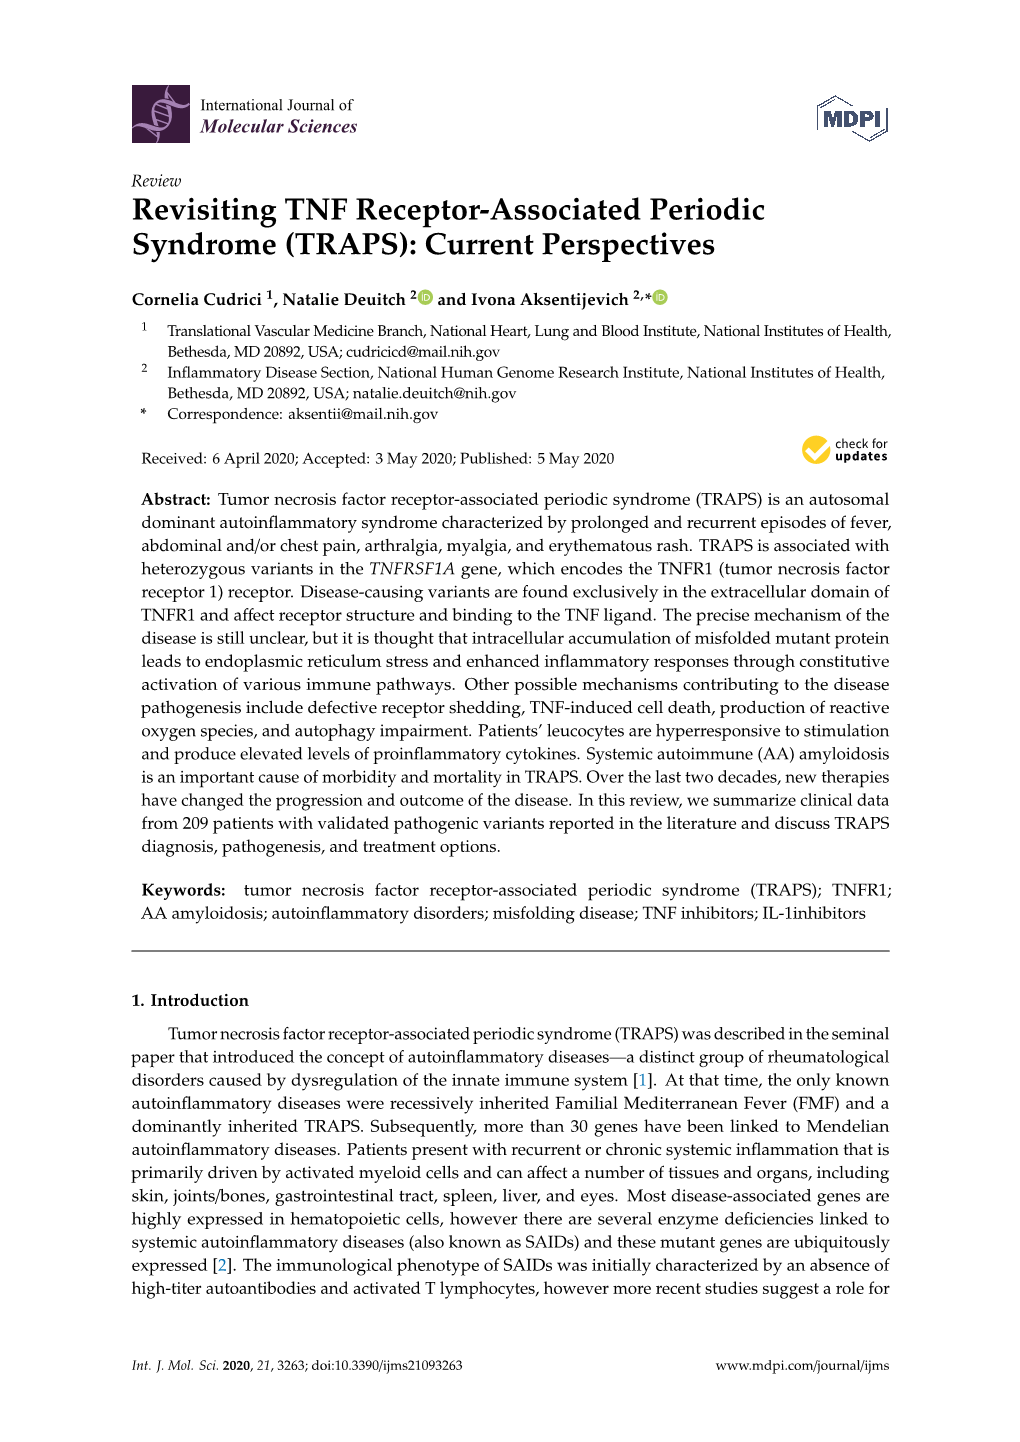 Revisiting TNF Receptor-Associated Periodic Syndrome (TRAPS): Current Perspectives